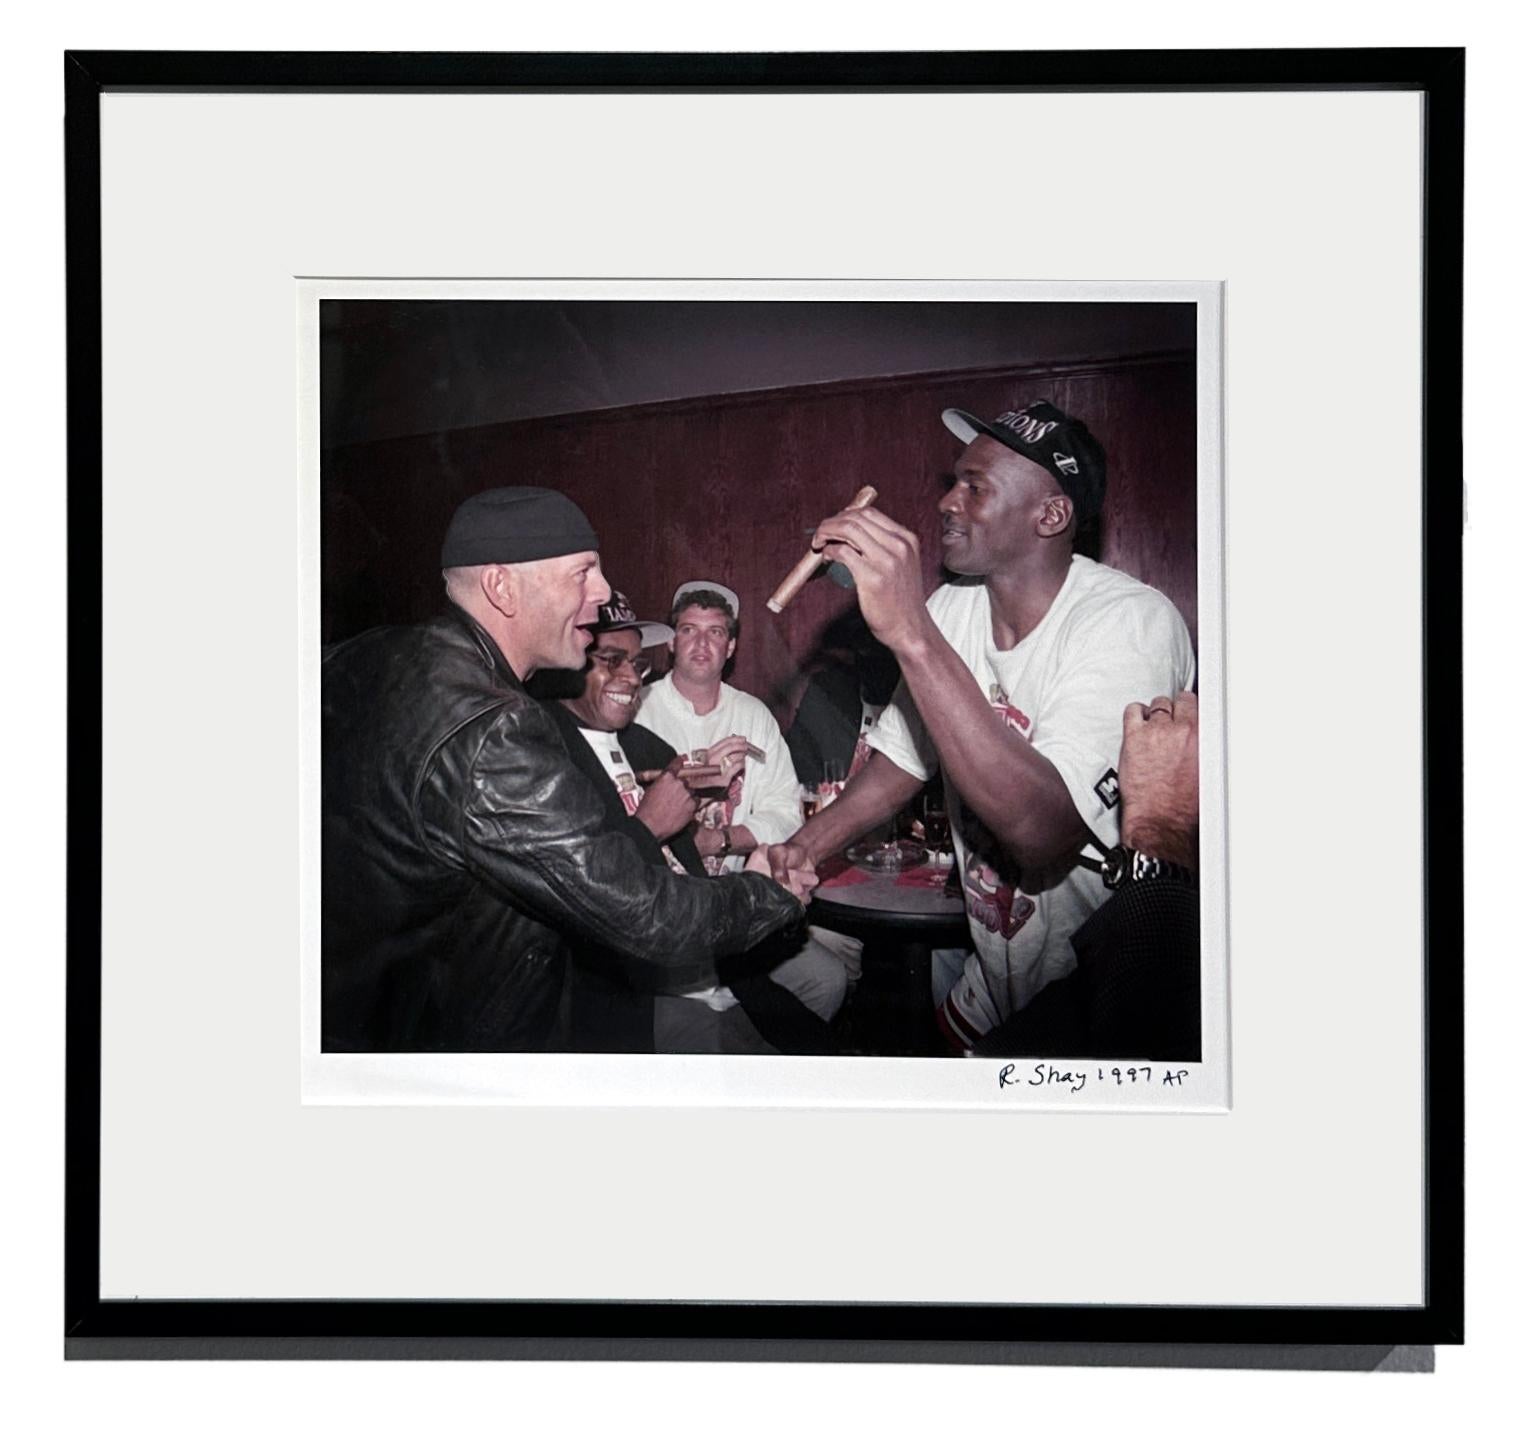 Cigars come out and congratulations abound as Michael Jordan wins his 5th Championship in 1997.  Here, Richard Shay has captured the moment when fan Bruce Willis looks at the superstar with such admiration and awe to be in his presence.  This A.P.